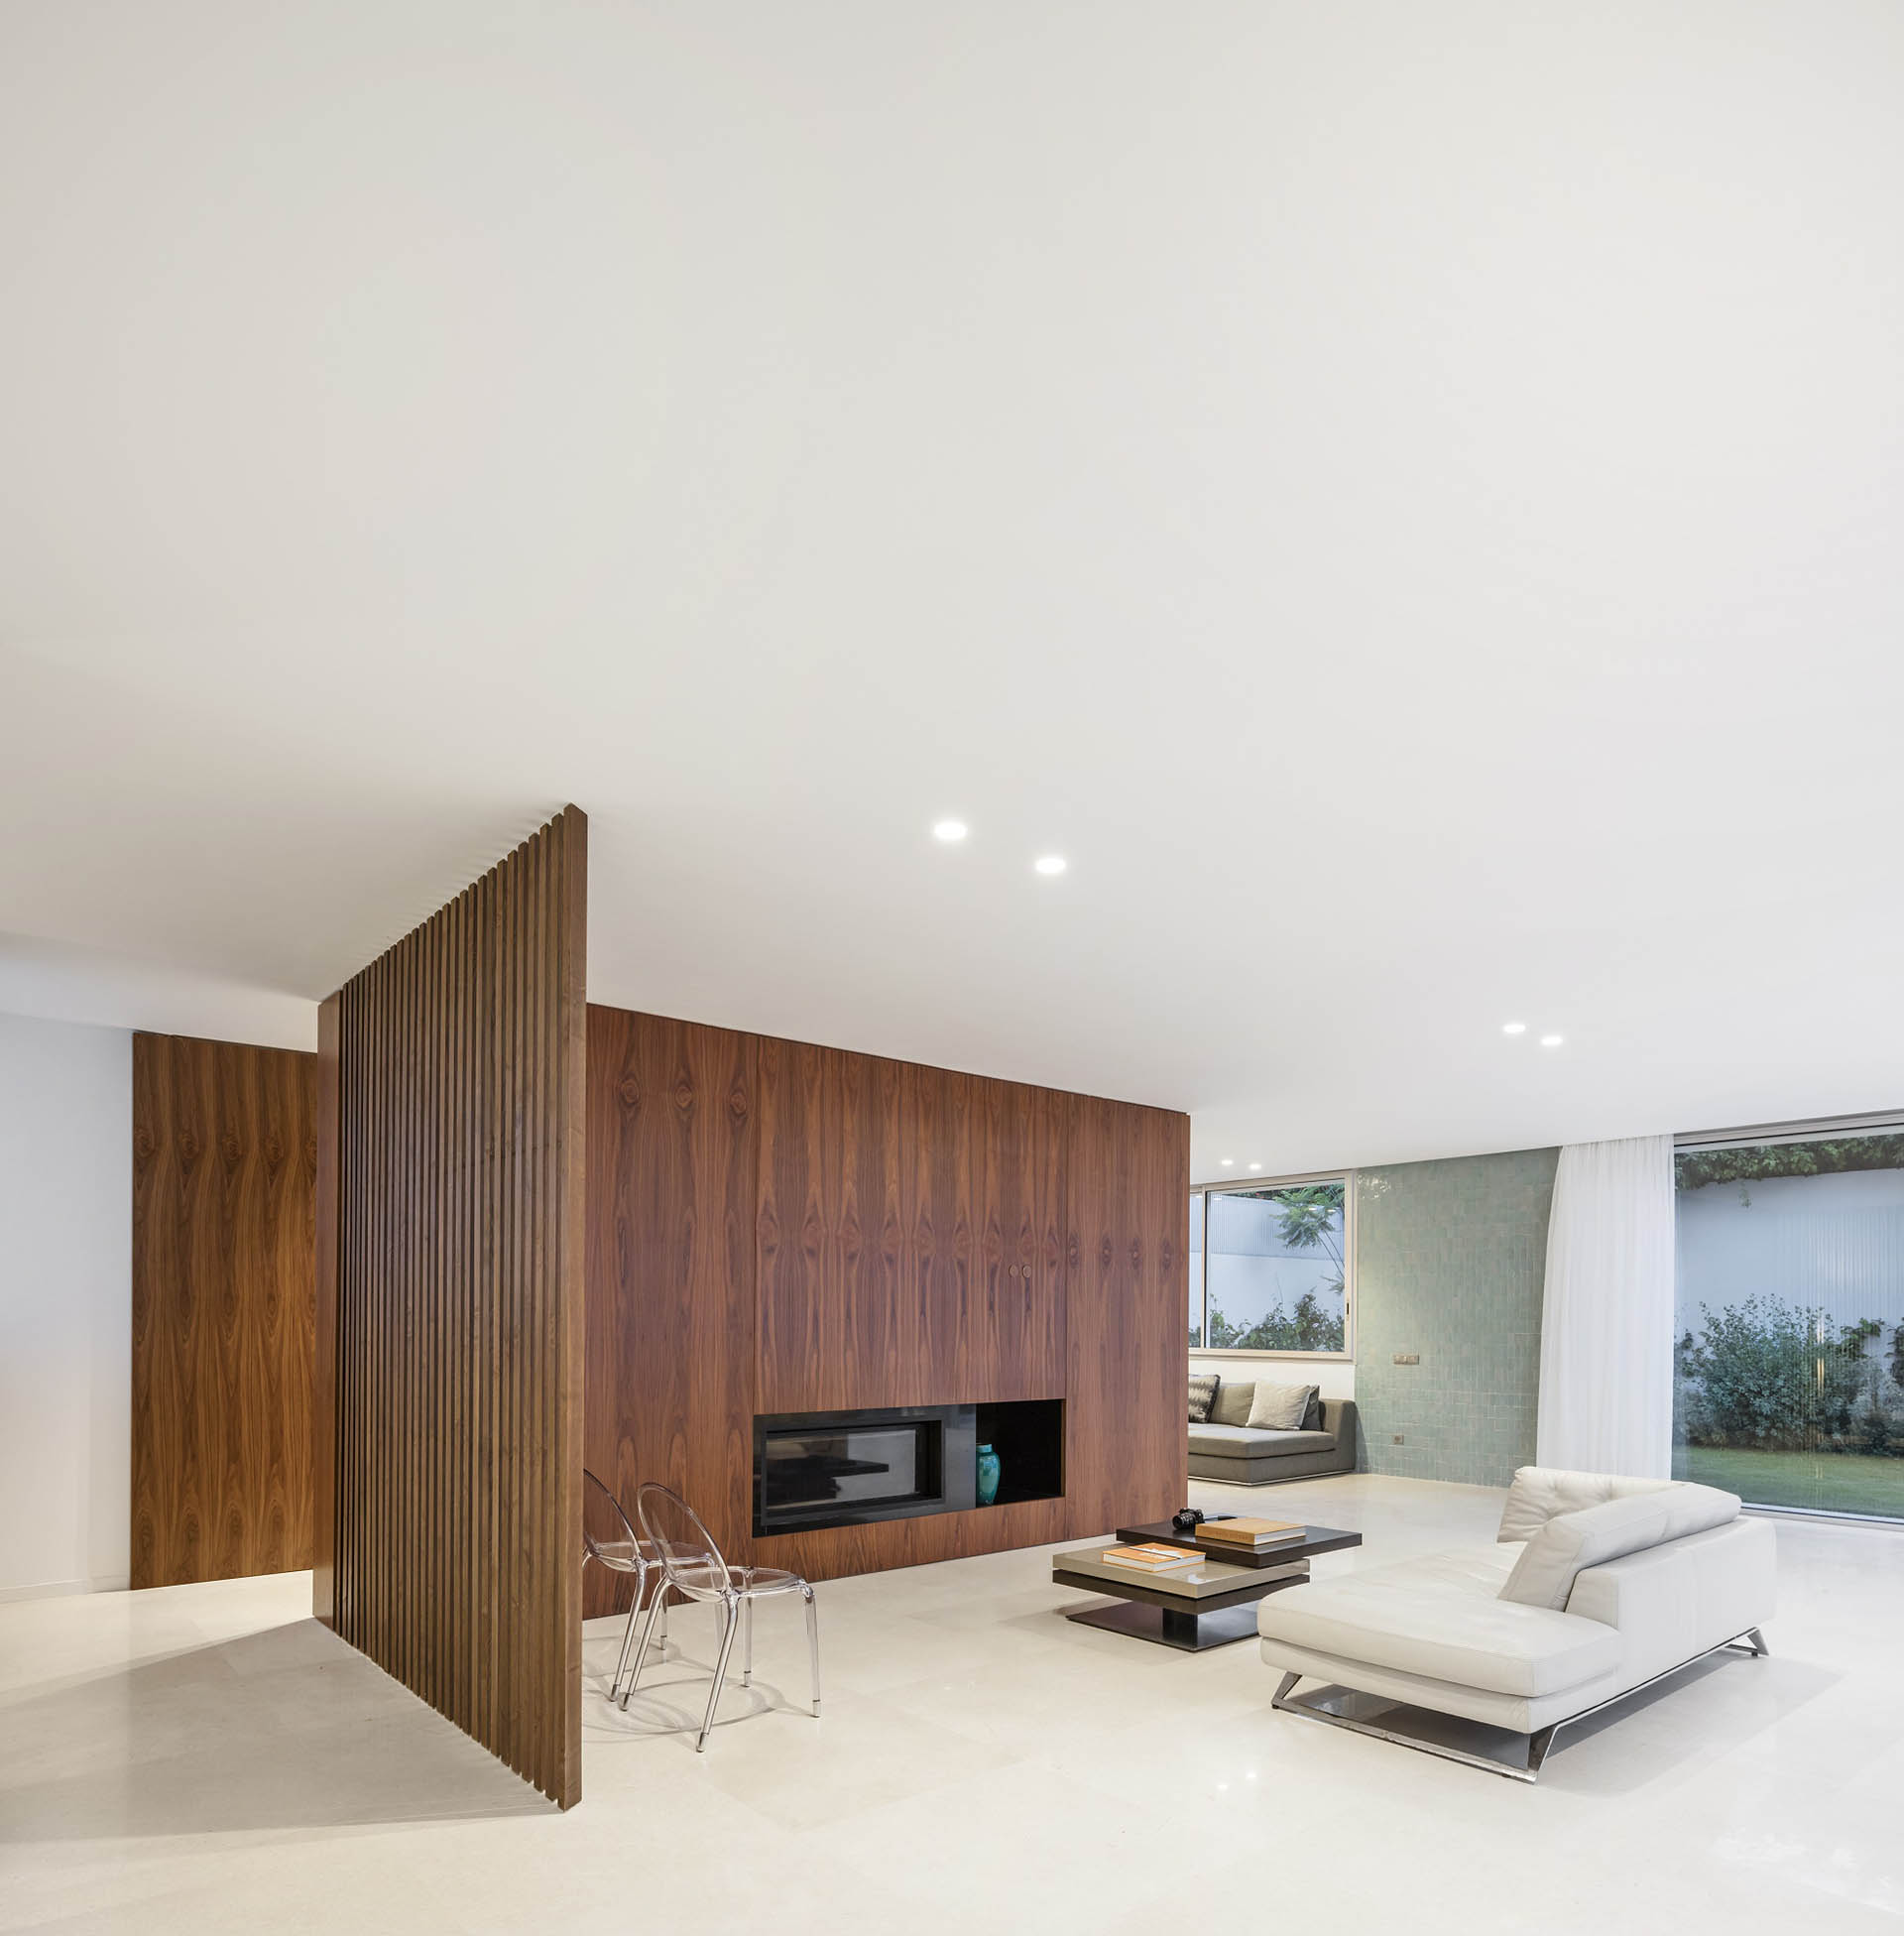 <p>&nbsp;The main living area features an extended wood-clad fireplace wall that screens the service areas behind it.&nbsp;&nbsp;</p>